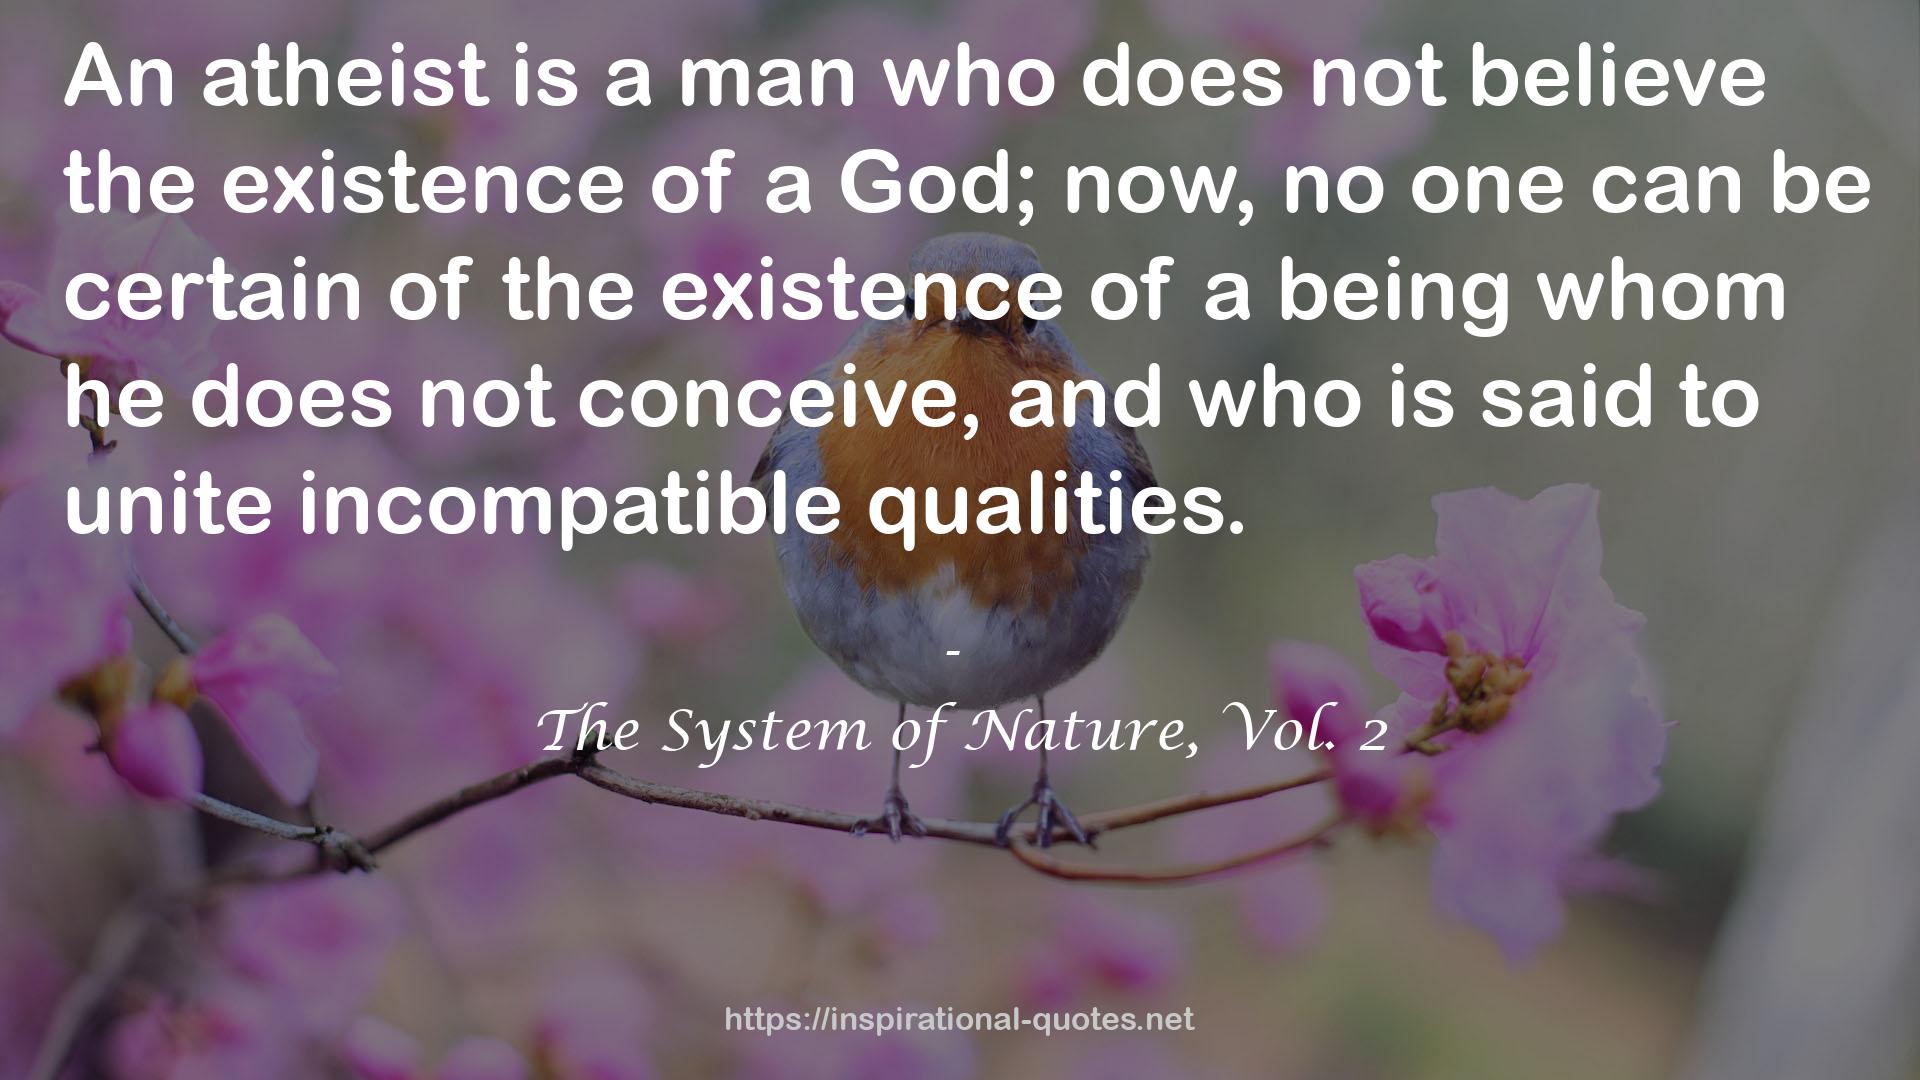 The System of Nature, Vol. 2 QUOTES